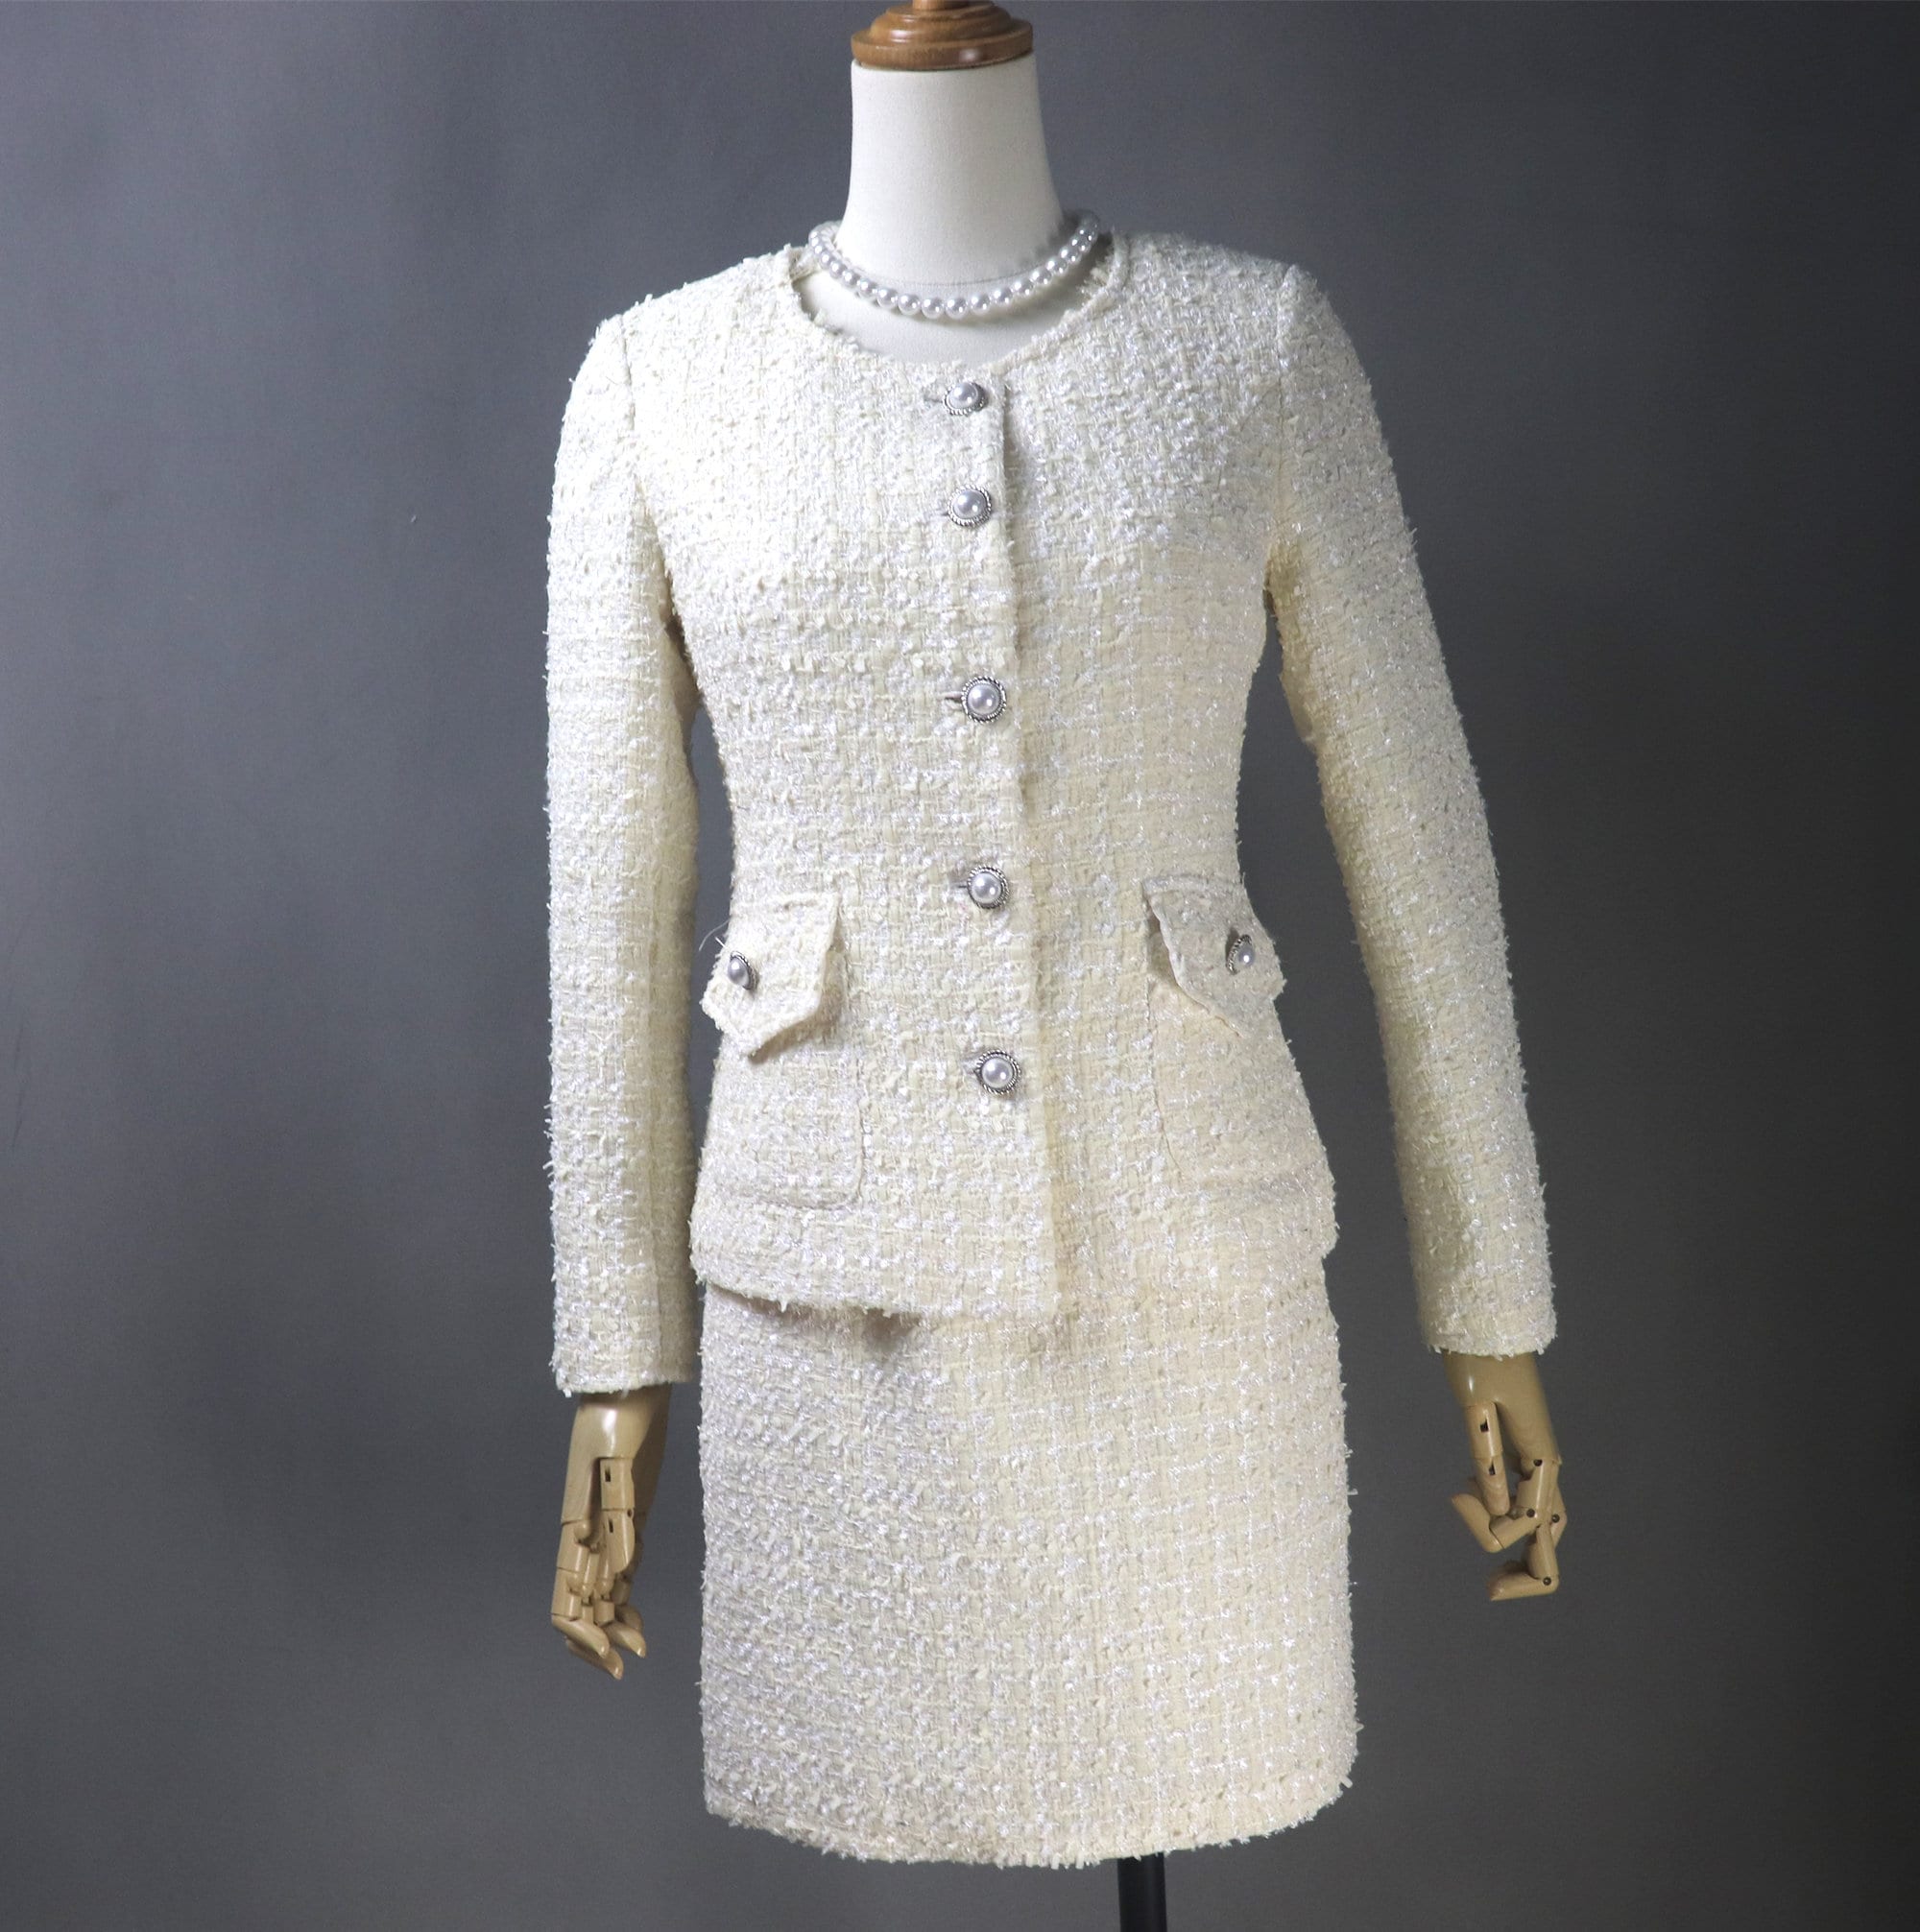 CHANEL, Jackets & Coats, Chanel Fall 203 White And Black Tweed  Interlocking Cc Button Jacket Size 34 Xs